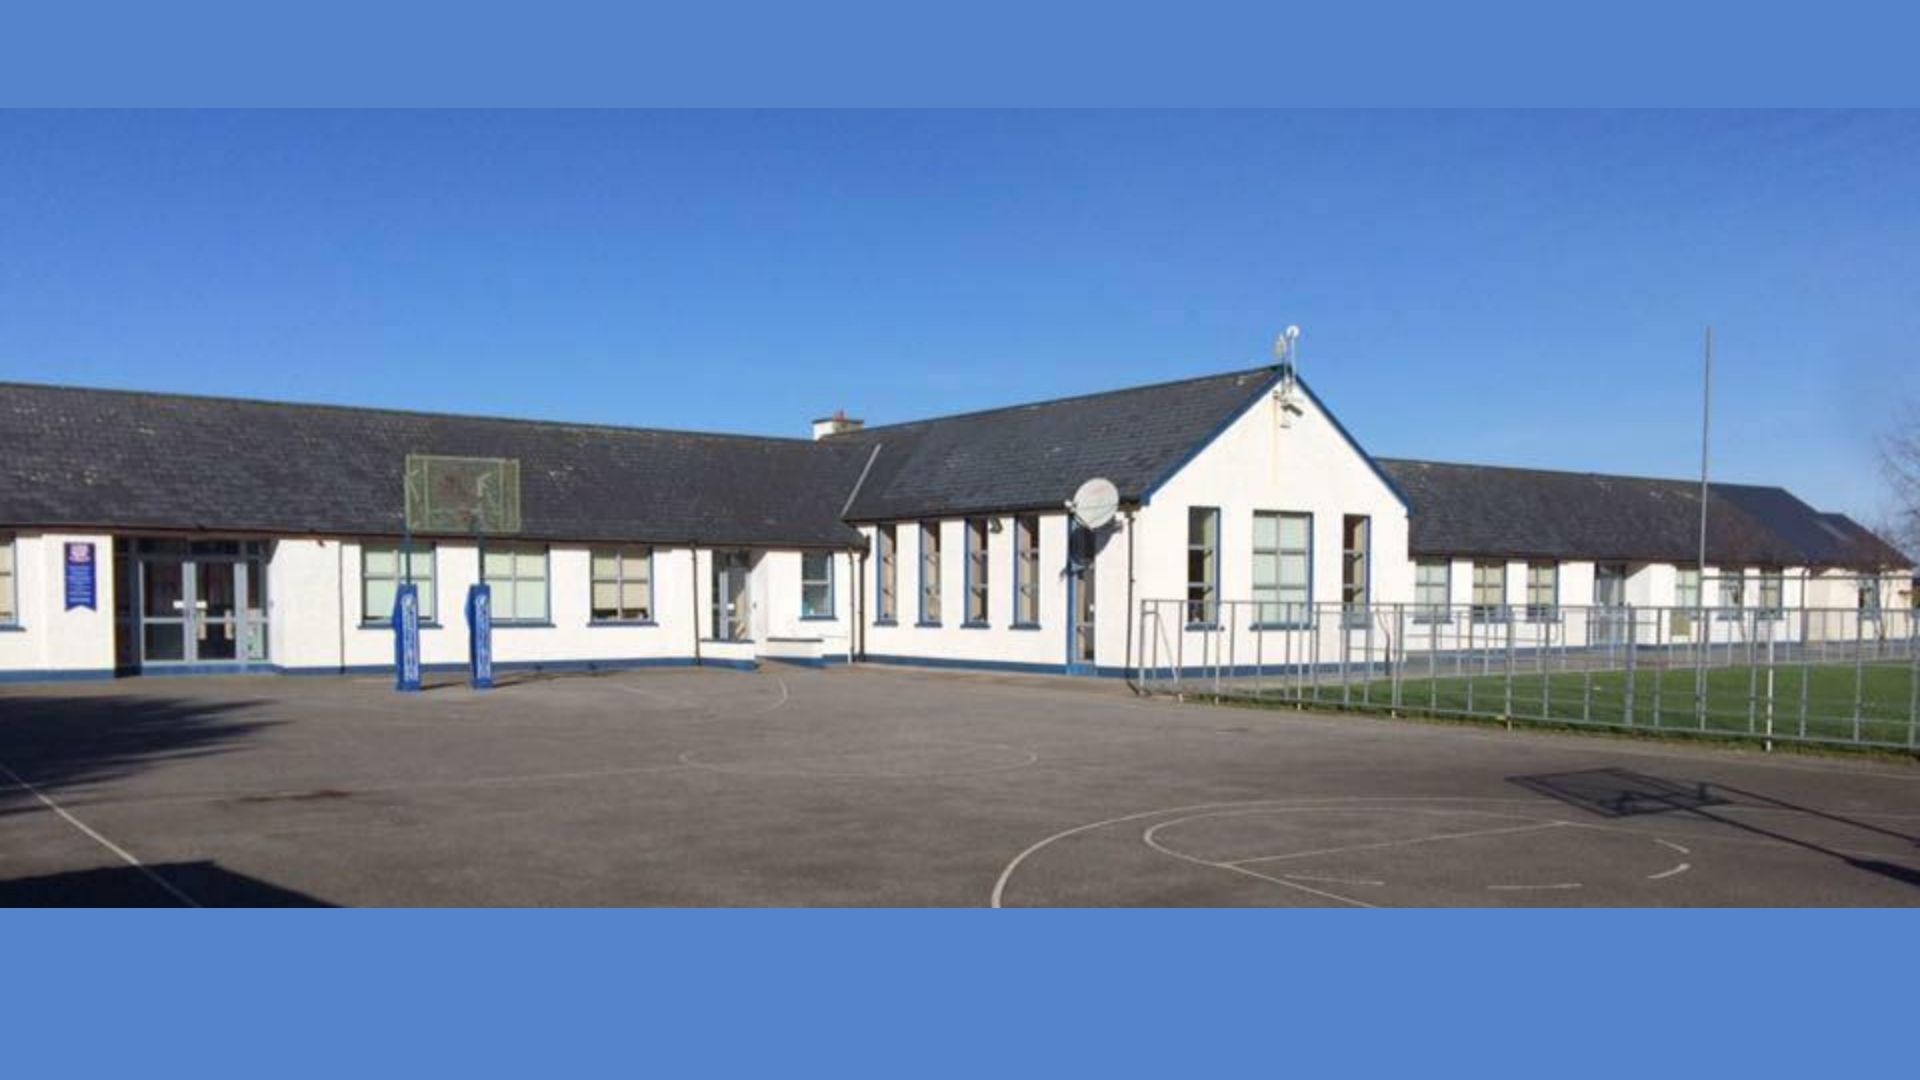 Caherline NS fundraiser Caherline National School fundraiser - Caherline National School will be hosting a series of sponsored walks to raise funds for the development of a multi-sports and AstroTurf facility on their school grounds.